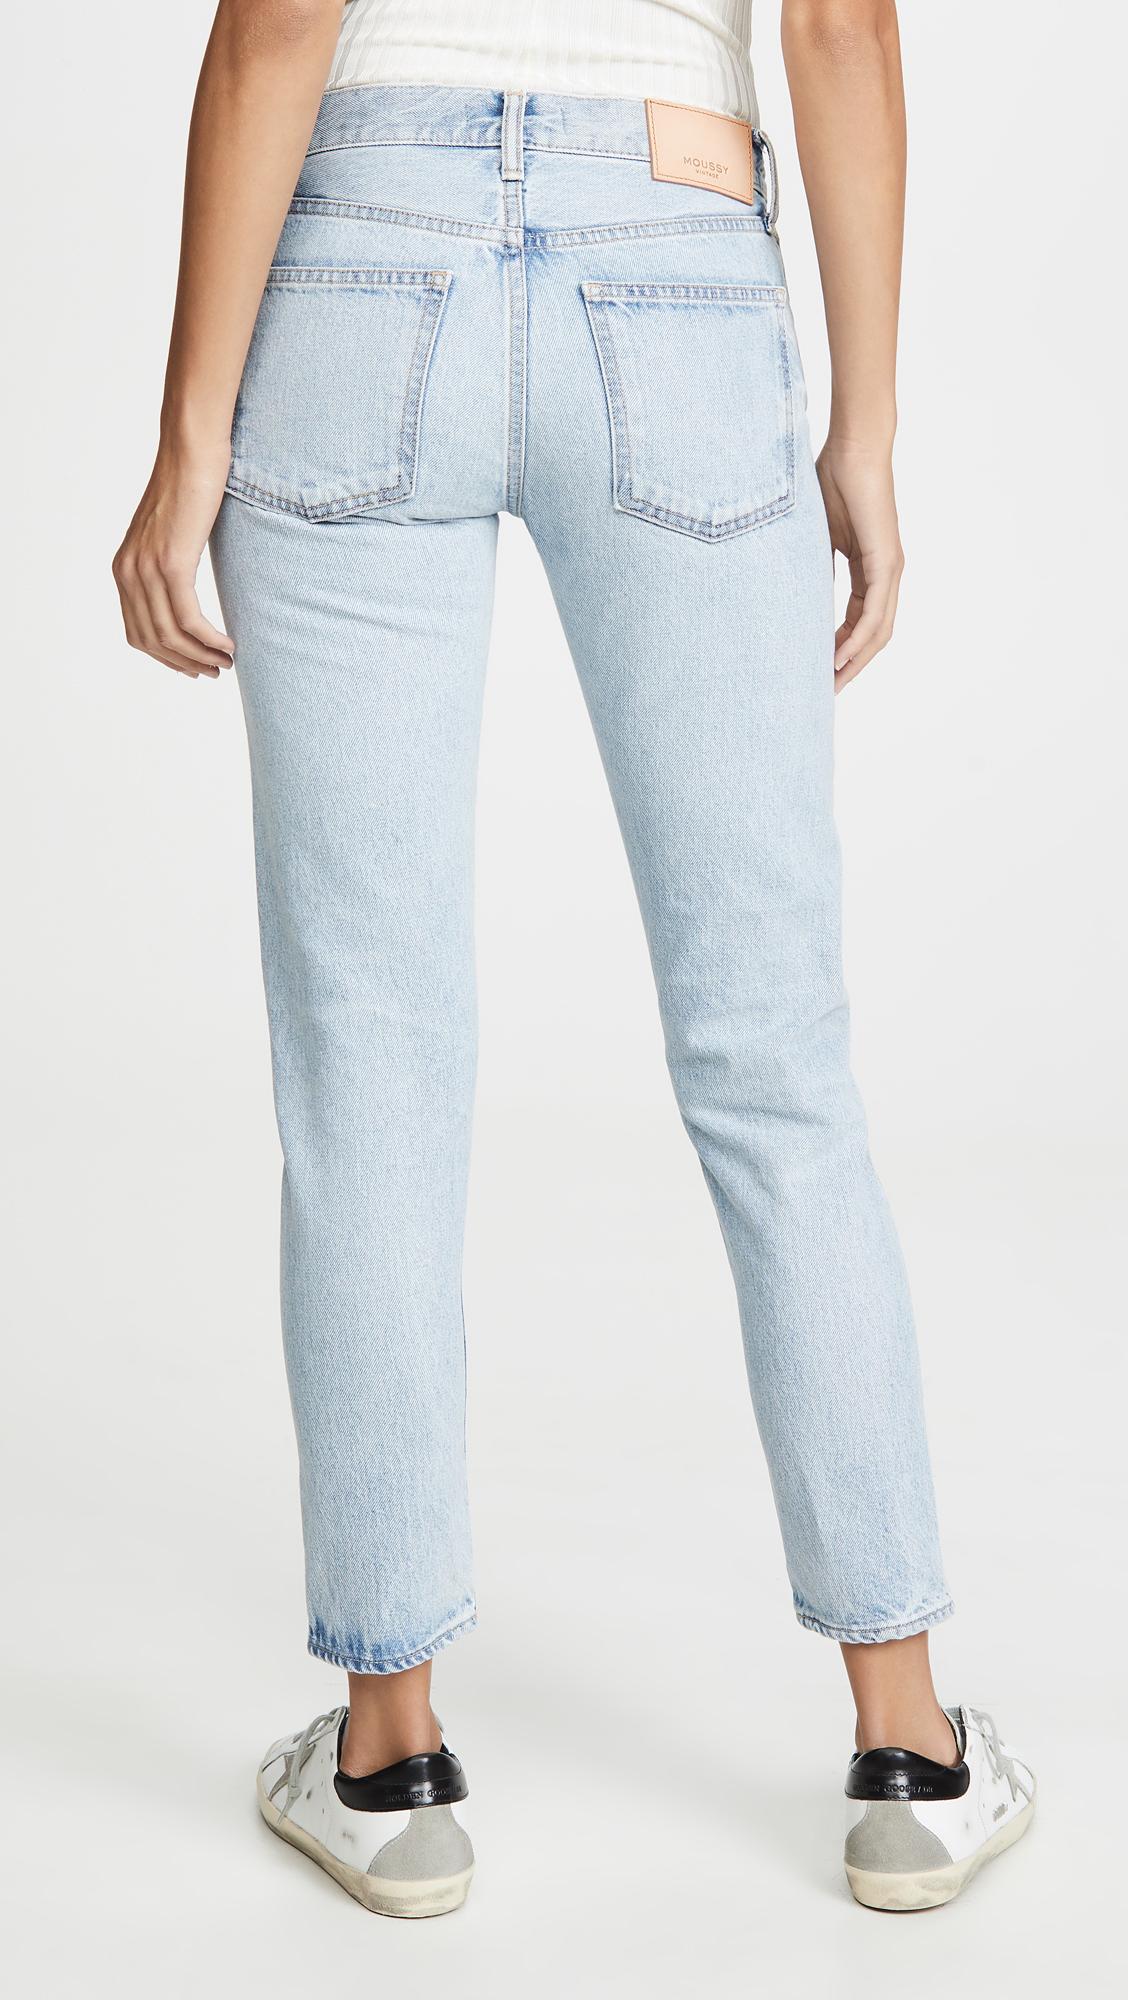 Moussy Denim Camilla Tapered Jeans in Light Blue (Blue) - Lyst